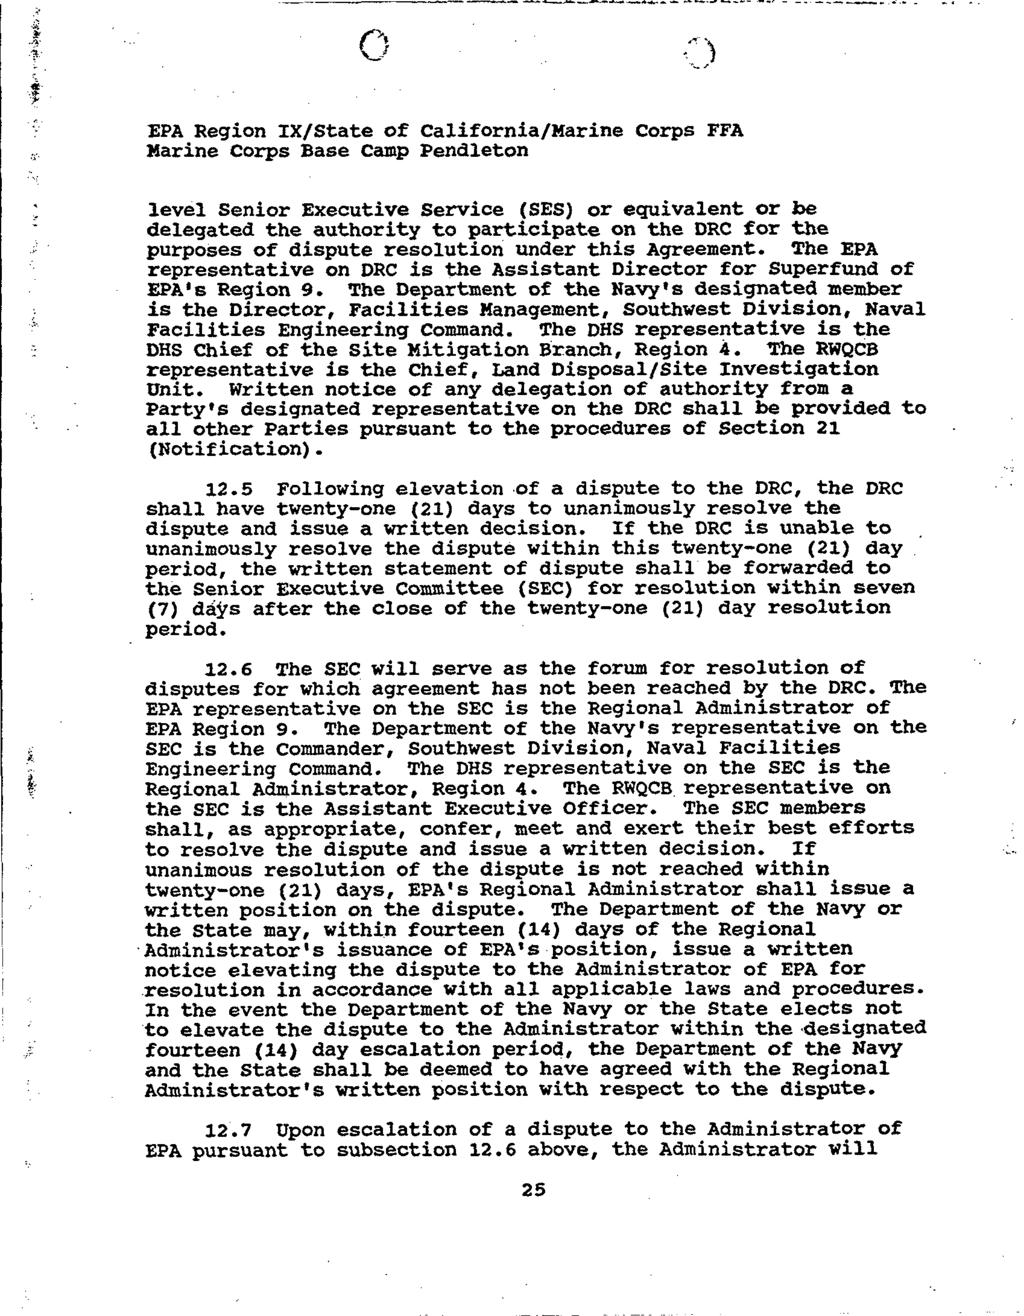 011 EPA Region IX/State of California/Marine Corps FFA level Senior Executive Service (SES) or equivalent or be delegated the authority to participate on the DRC for the purposes of dispute